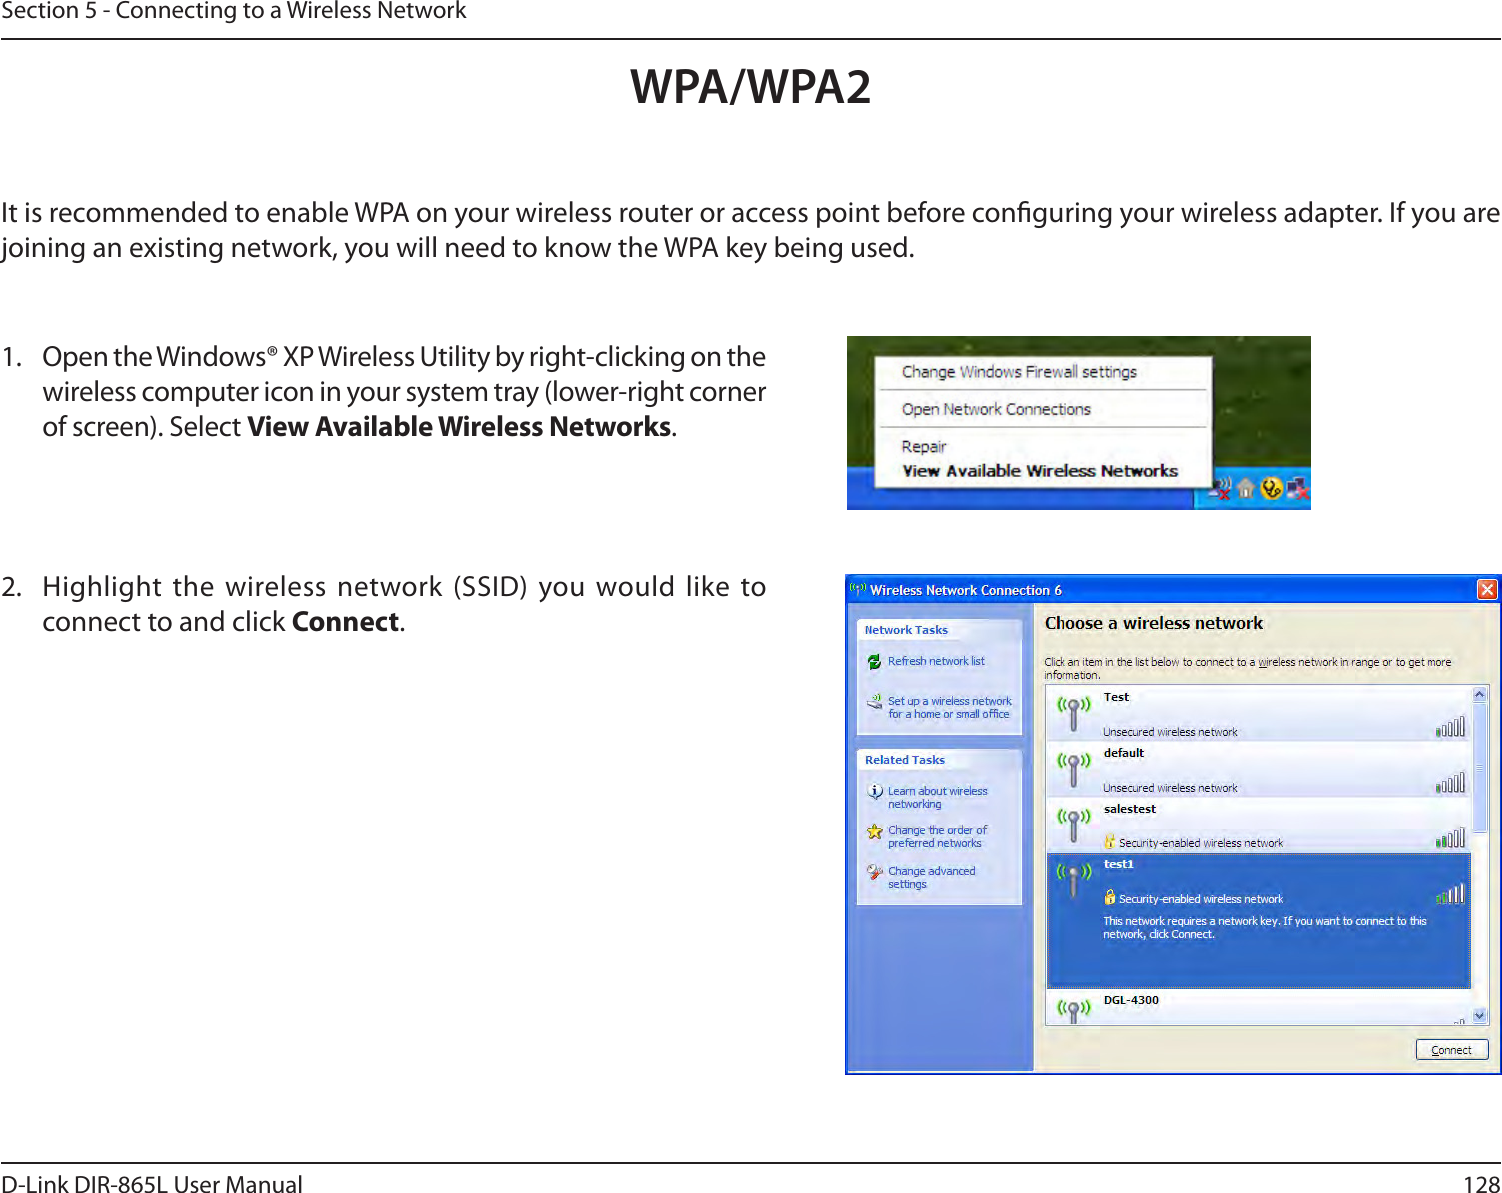 128D-Link DIR-865L User ManualSection 5 - Connecting to a Wireless NetworkIt is recommended to enable WPA on your wireless router or access point before conguring your wireless adapter. If you are joining an existing network, you will need to know the WPA key being used.2.  Highlight the  wireless network (SSID) you would like to connect to and click Connect.1.  Open the Windows® XP Wireless Utility by right-clicking on the wireless computer icon in your system tray (lower-right corner of screen). Select View Available Wireless Networks. WPA/WPA2